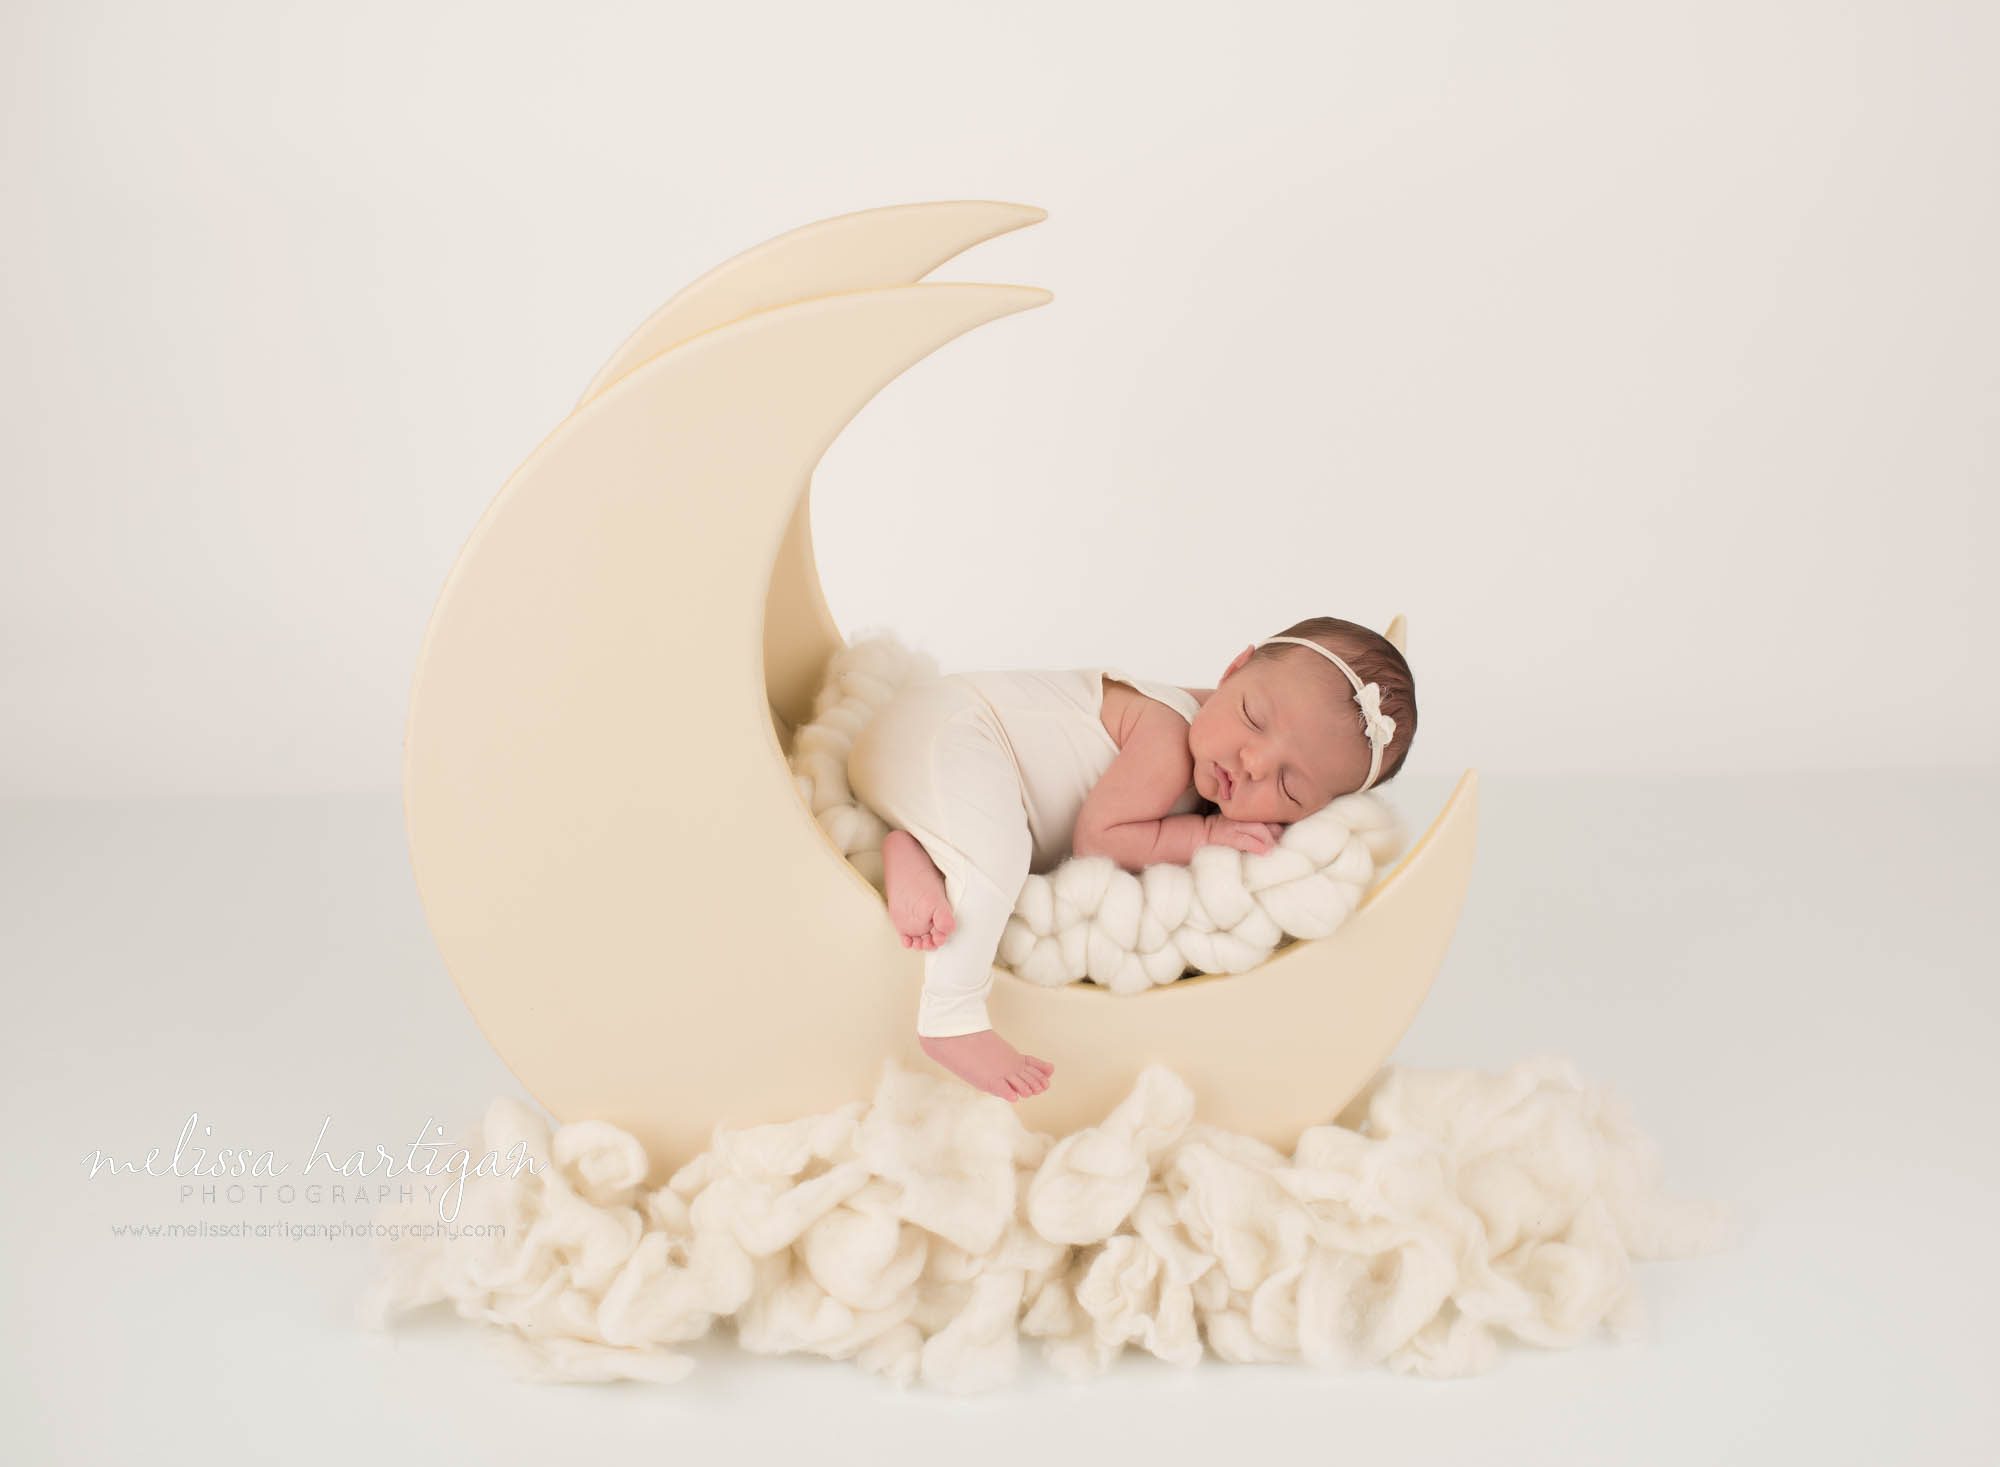 newborn baby girl posed on wooden moon prop wearing cream outfit